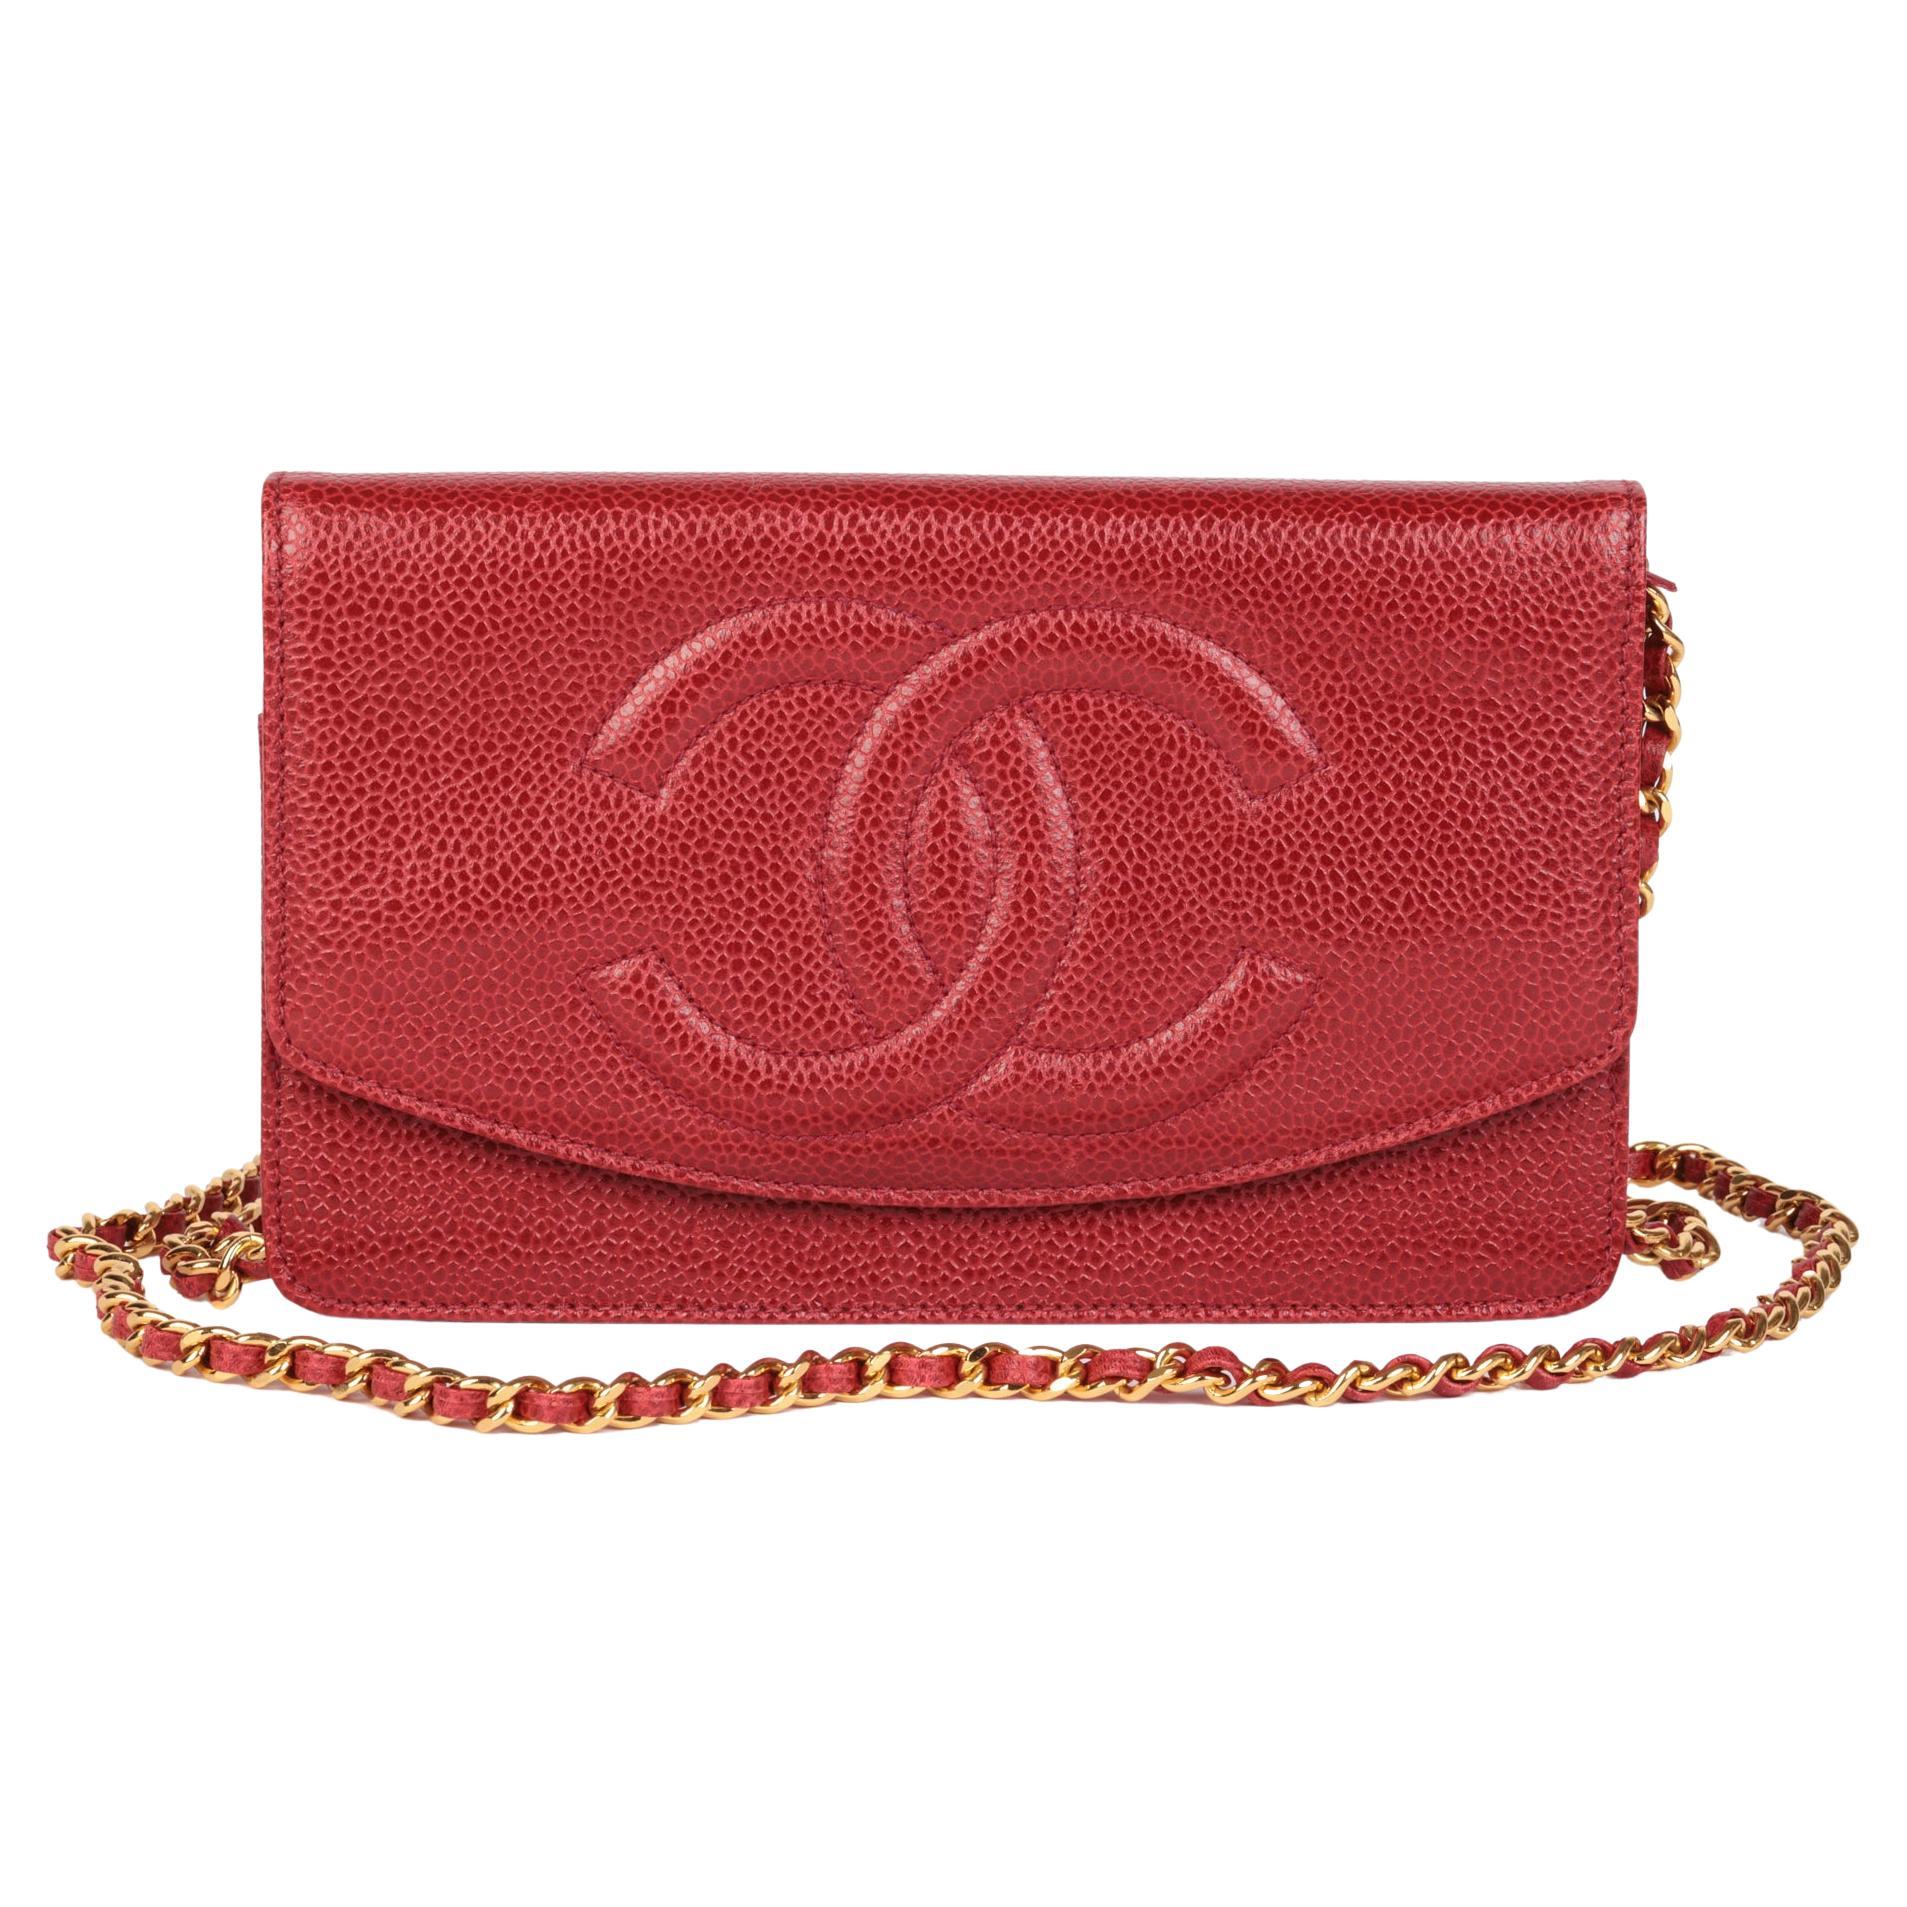 CHANEL Red Caviar Leather Vintage Timeless Wallet-on-Chain WOC at